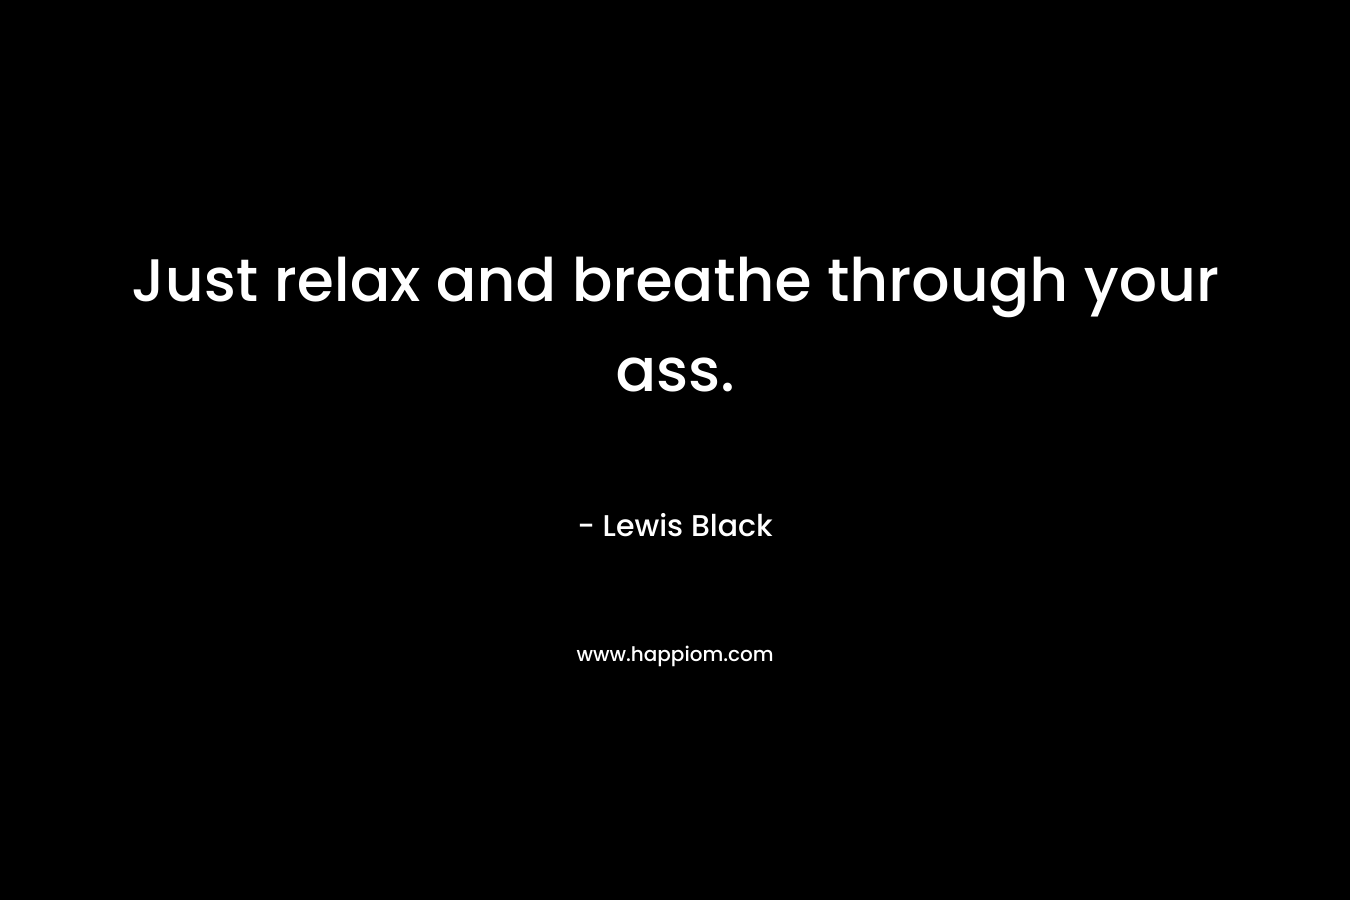 Just relax and breathe through your ass.